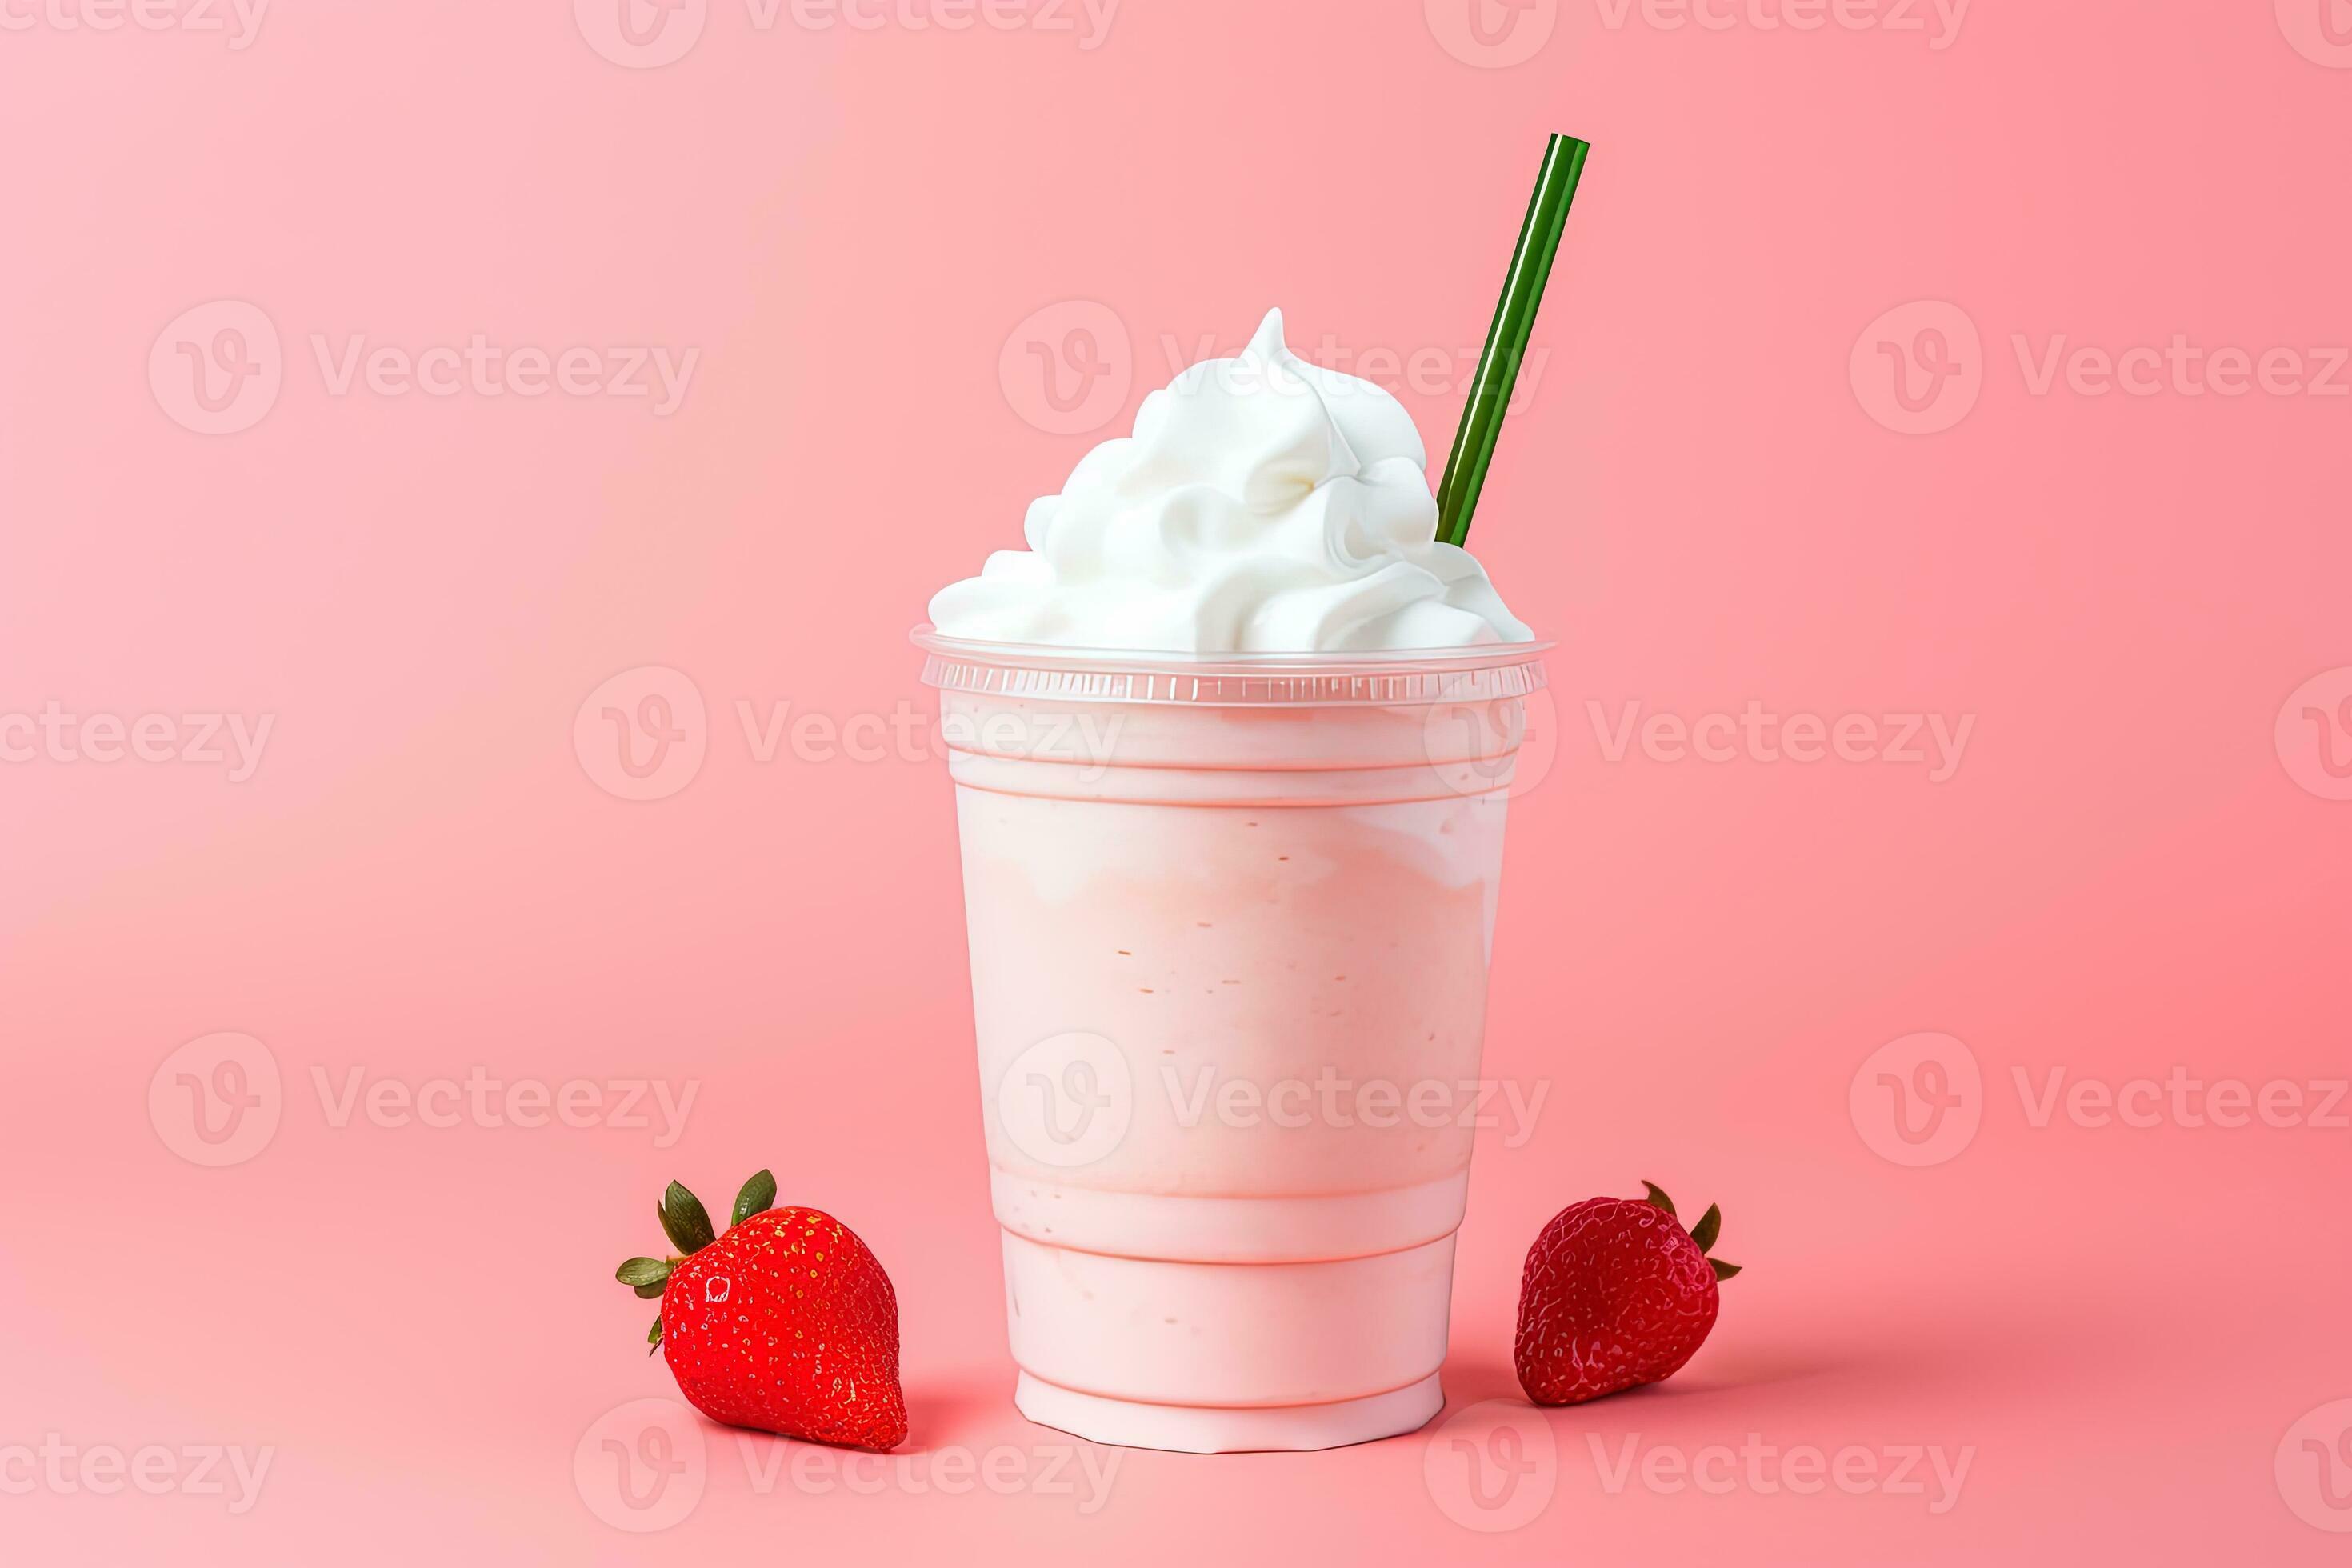 https://static.vecteezy.com/system/resources/previews/026/282/887/large_2x/strawberry-milkshake-in-plastic-takeaway-cup-isolated-on-pink-background-ai-generated-photo.jpg